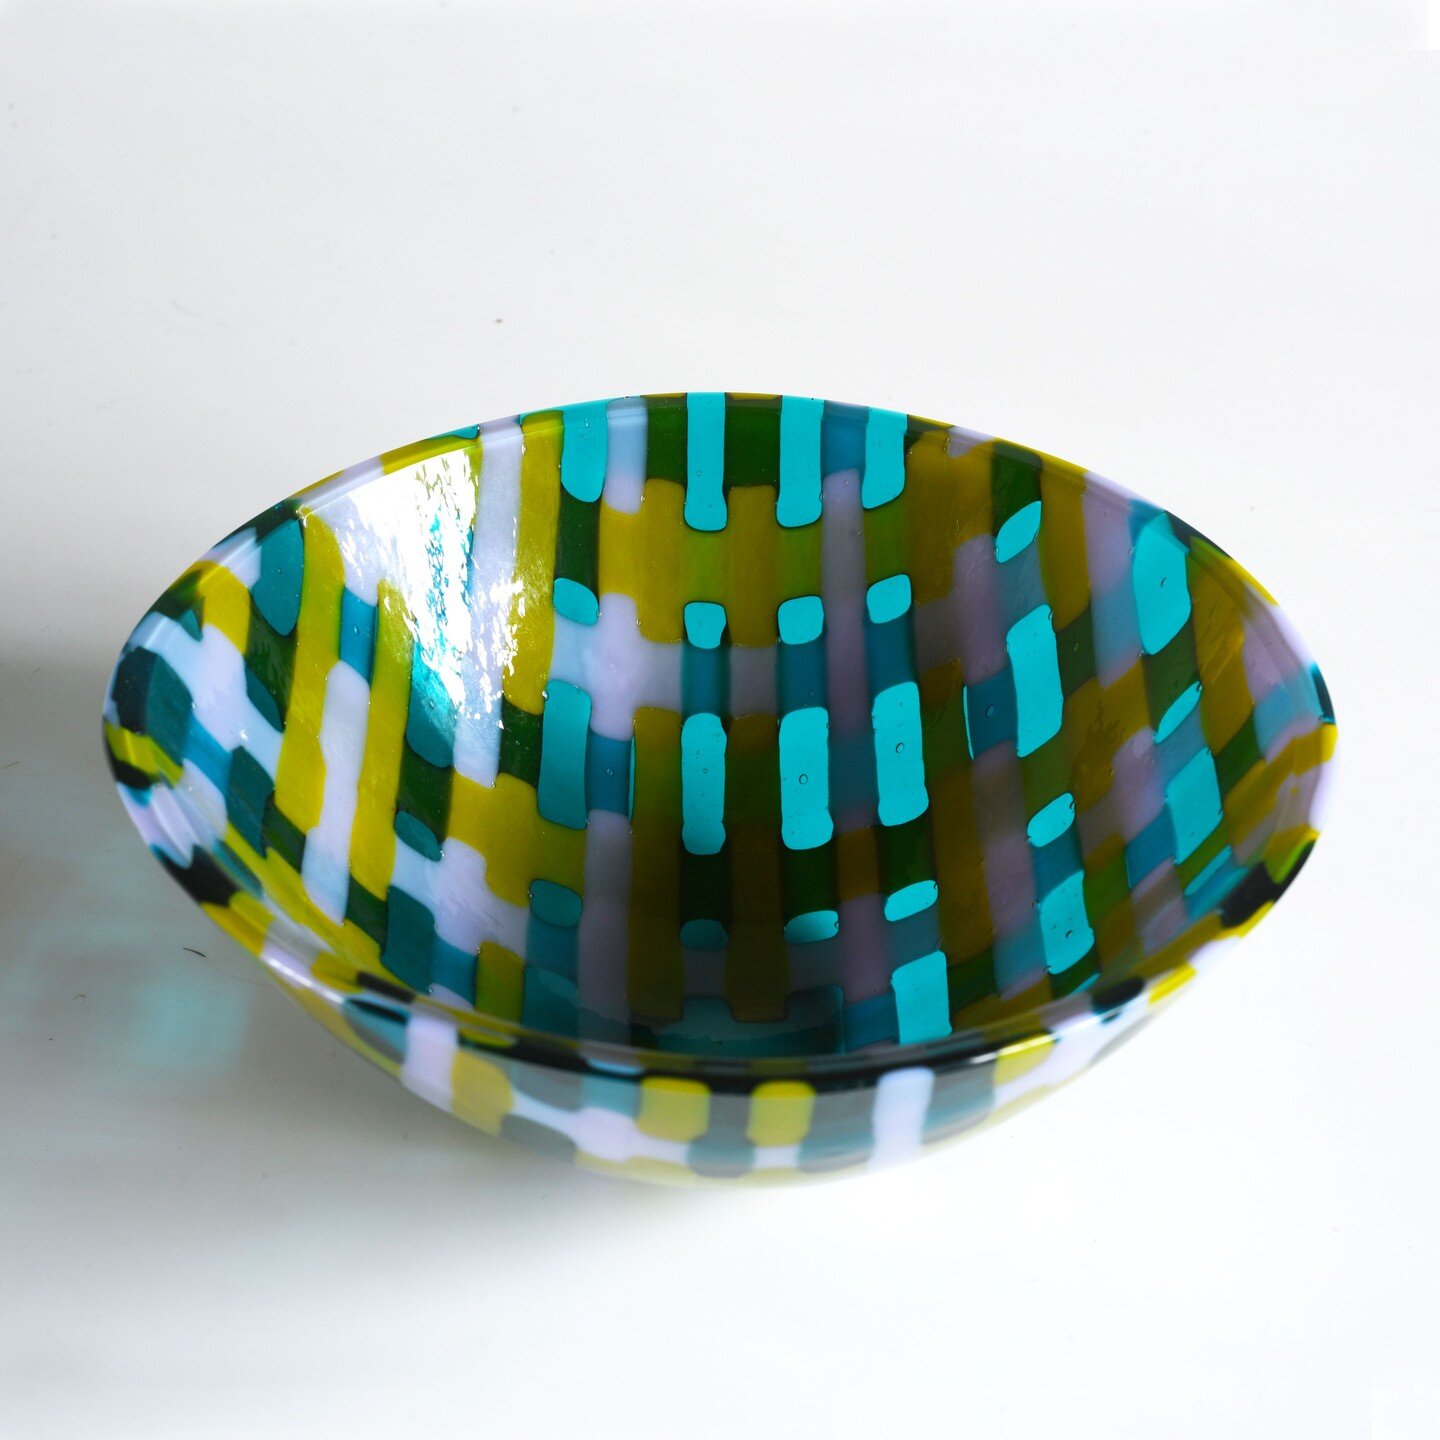 Woven Bowl, made by Shirley Eccles
Kiln formed, cut and Polished. @shirley.eccles

Shirley has several Glass Fusing workshops coming up, including a series of technique based workshops at Reading College. Take a look at Shirley's link in bio to find 